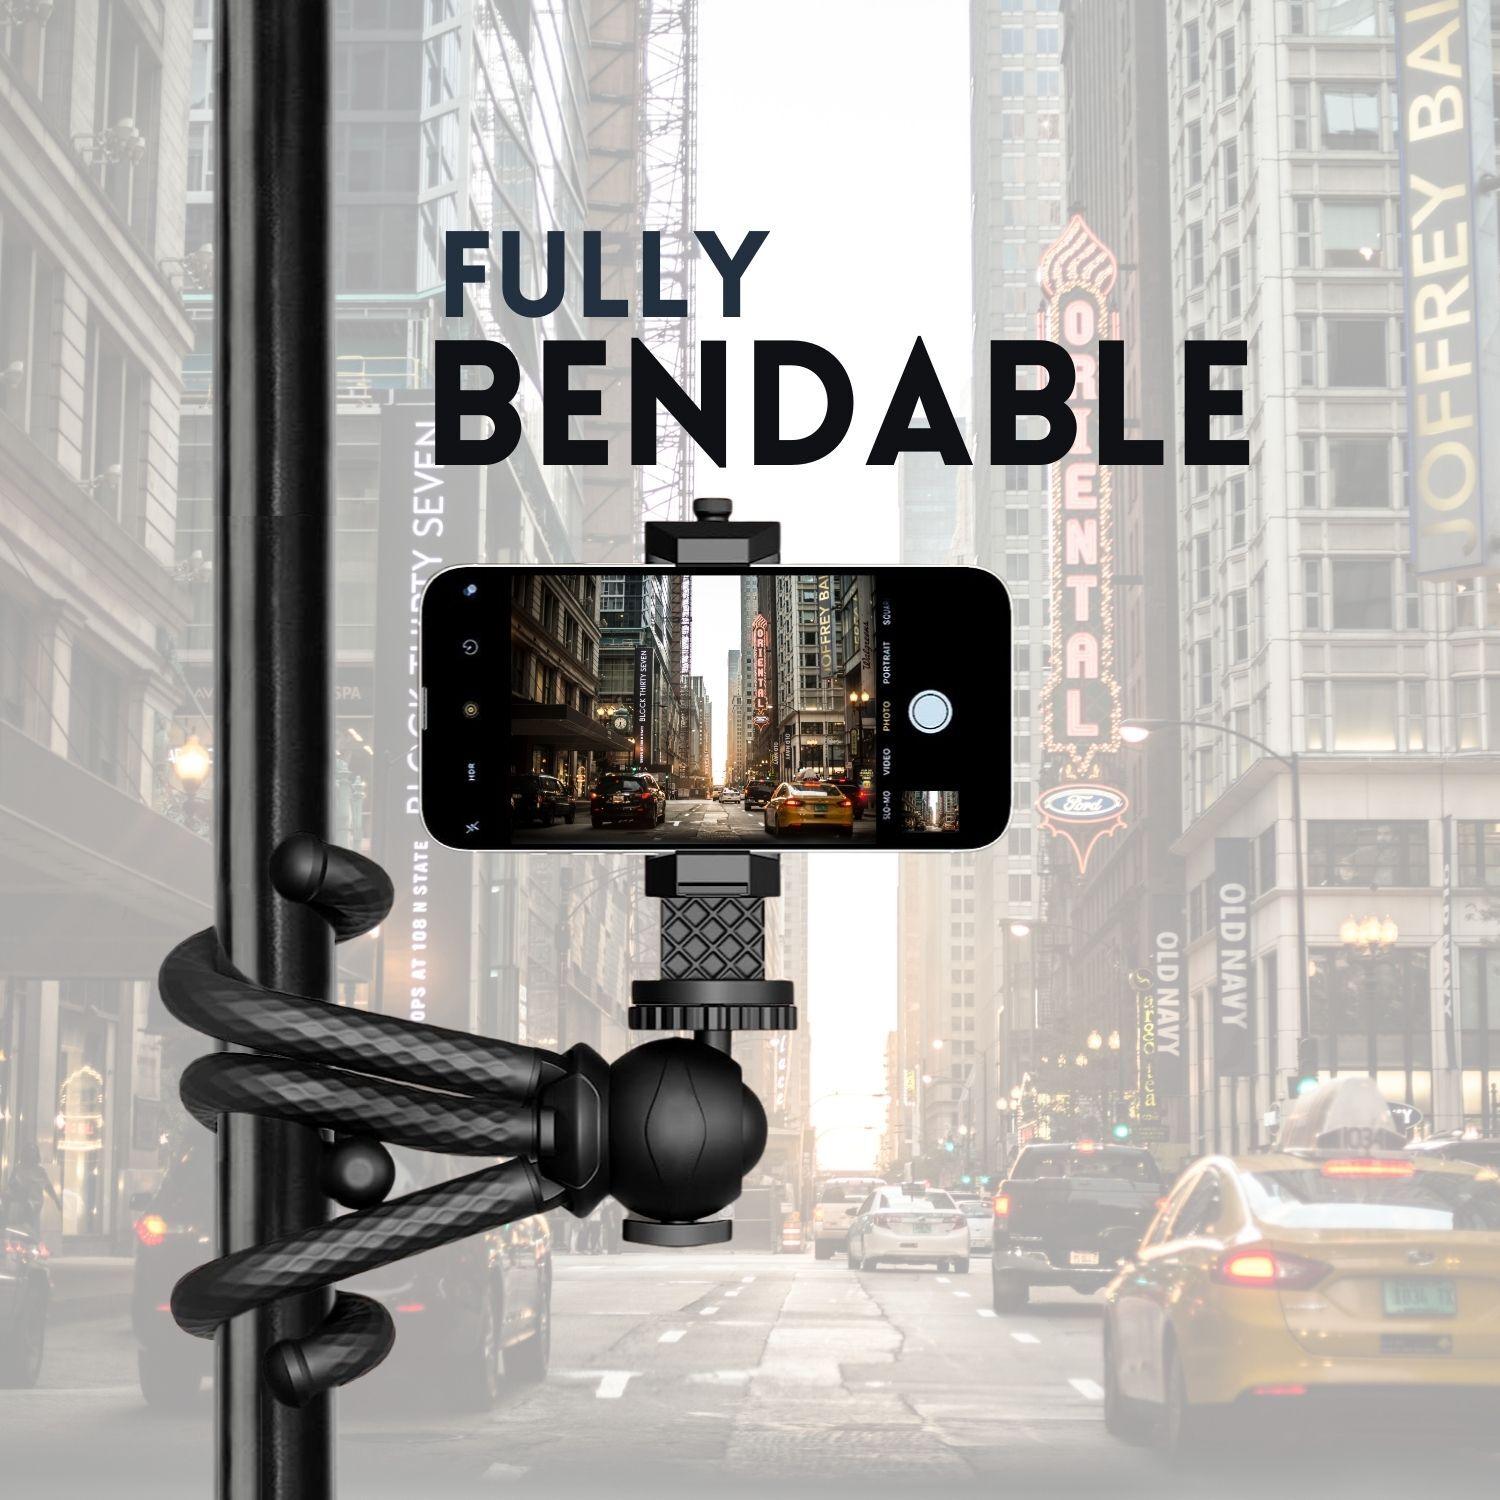 Fully bendable flexible tripod attached to pole on busy steet